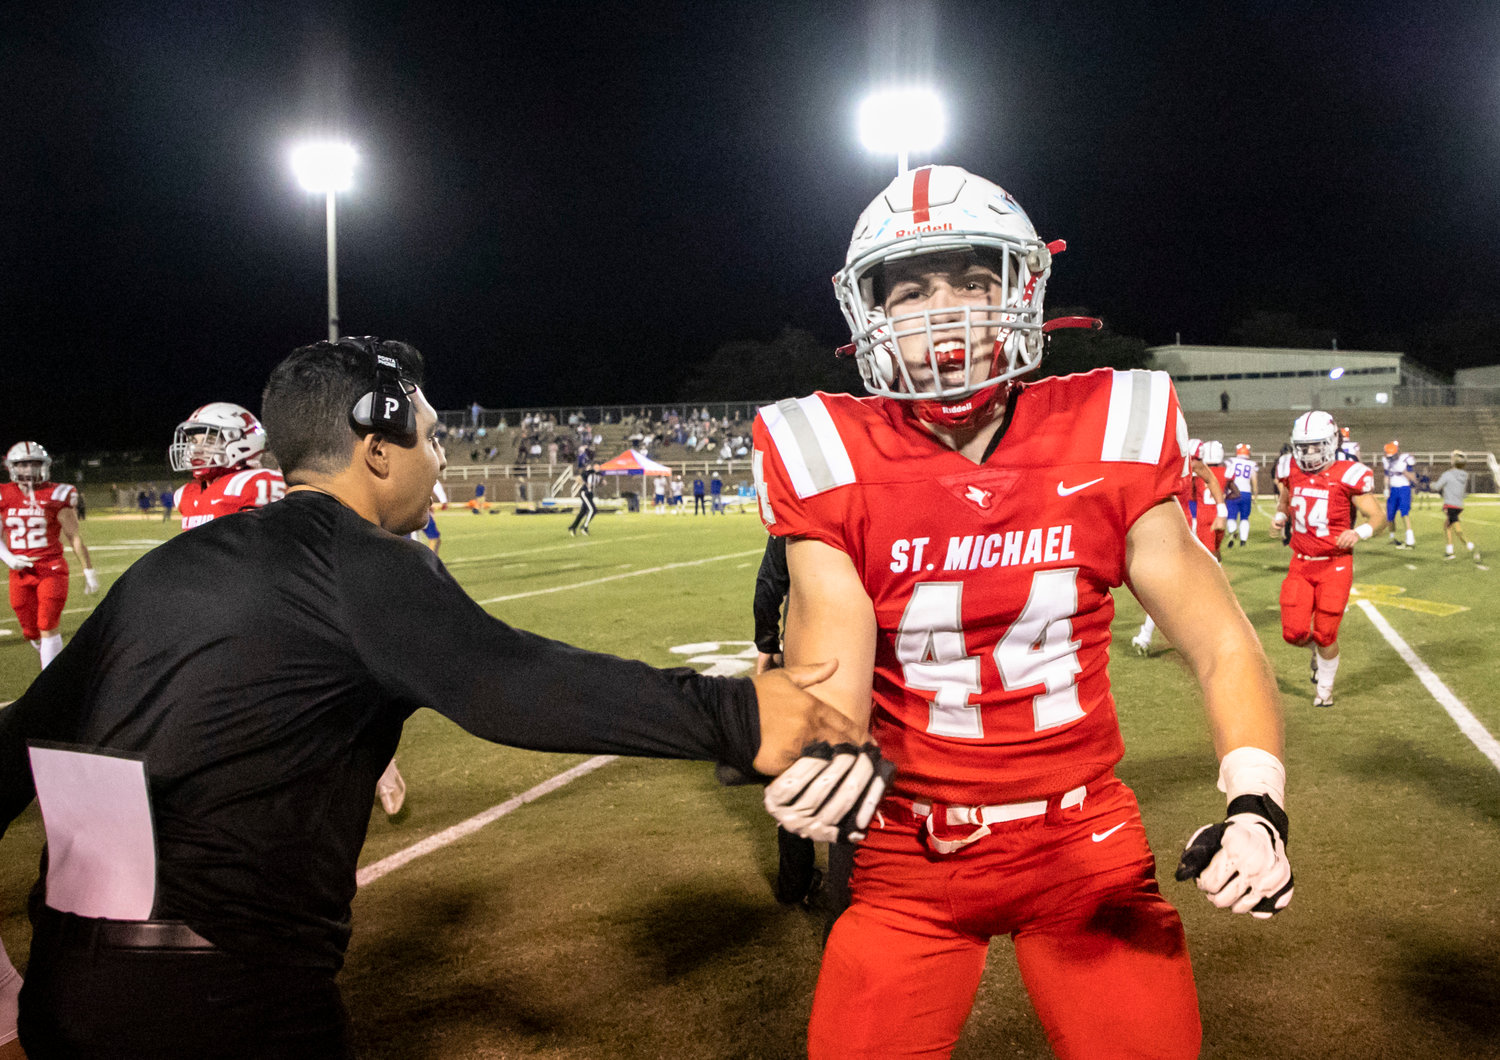 Cardinal senior Crane Guilian and the St. Michael defense celebrate a fumble recovery in the first half of the Class 4A Region 1 game against Orange Beach Thursday night at Fairhope Municipal Stadium.